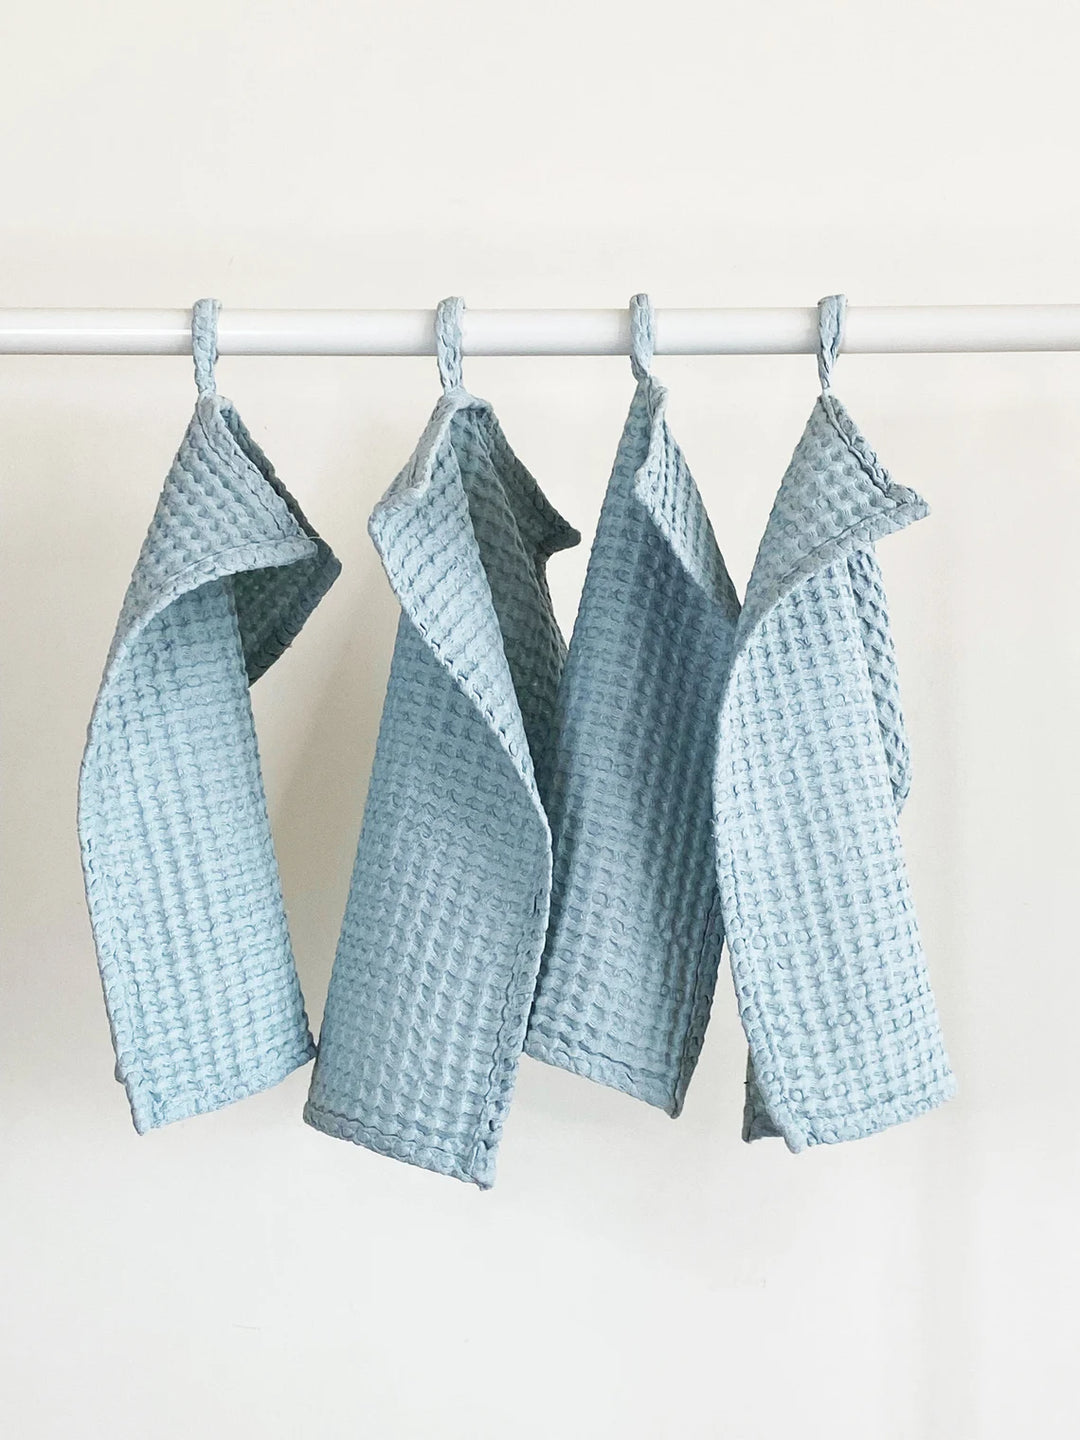 Linen Waffle Face Cloth Towels Set Of 4 In Sky Blue Color - Daily Linen